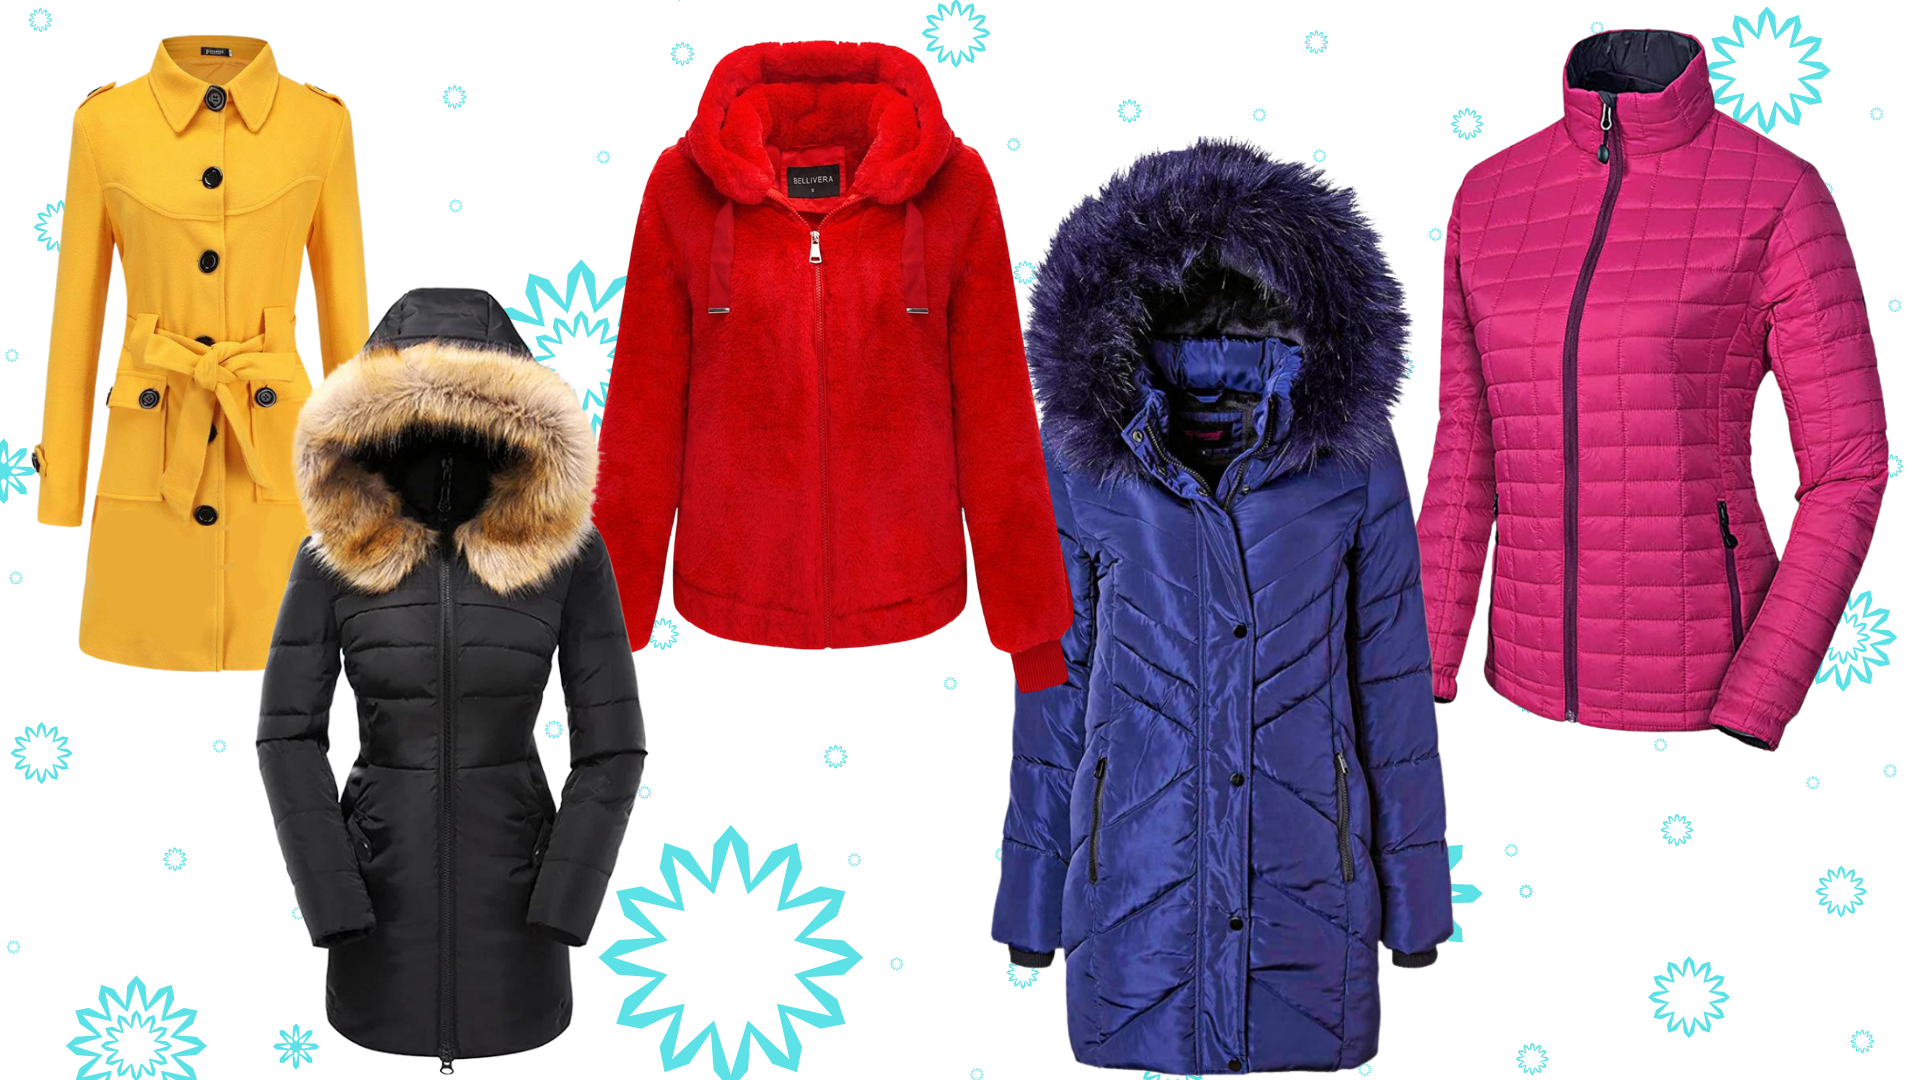 Must Have Winter Coats on Amazon - Warm, Stylish & Affordable